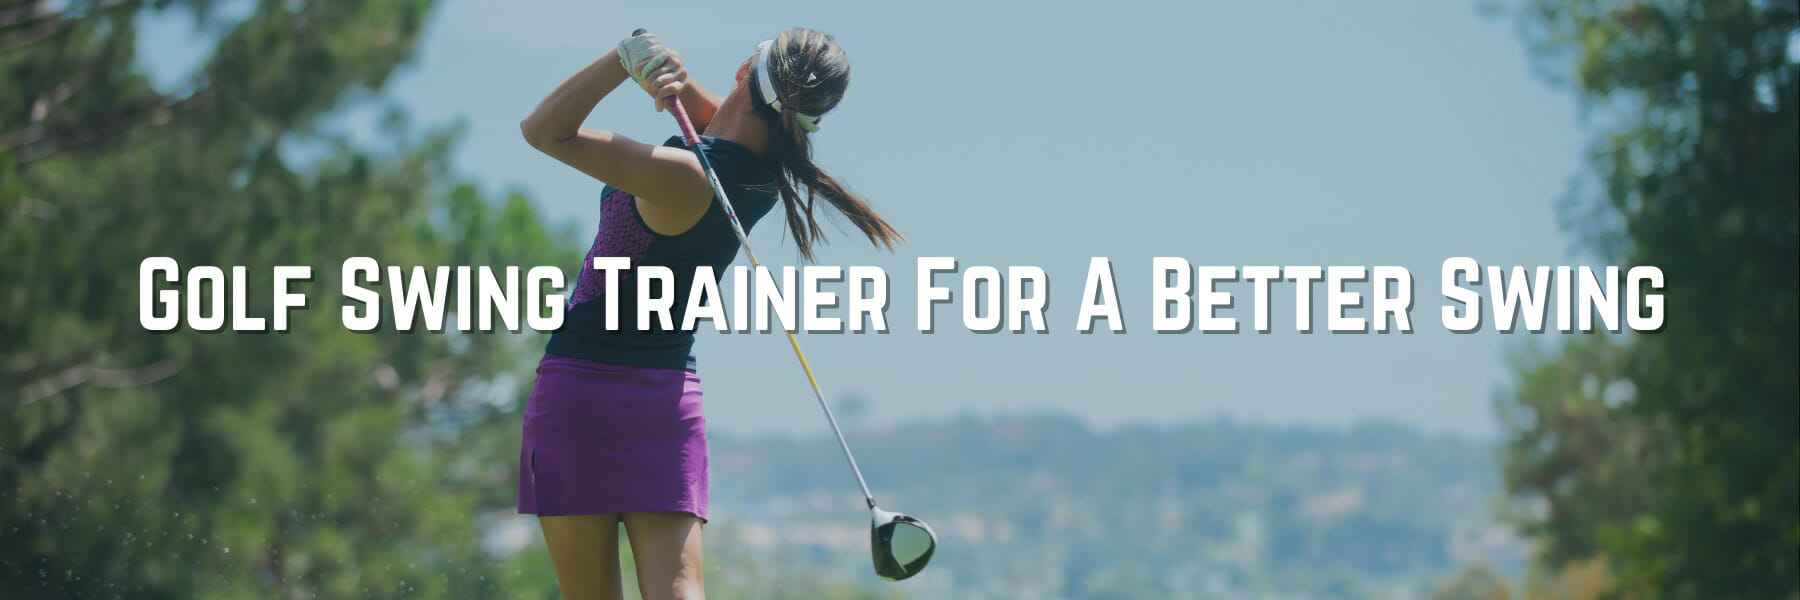 Golf Swing Trainer For A Better Swing